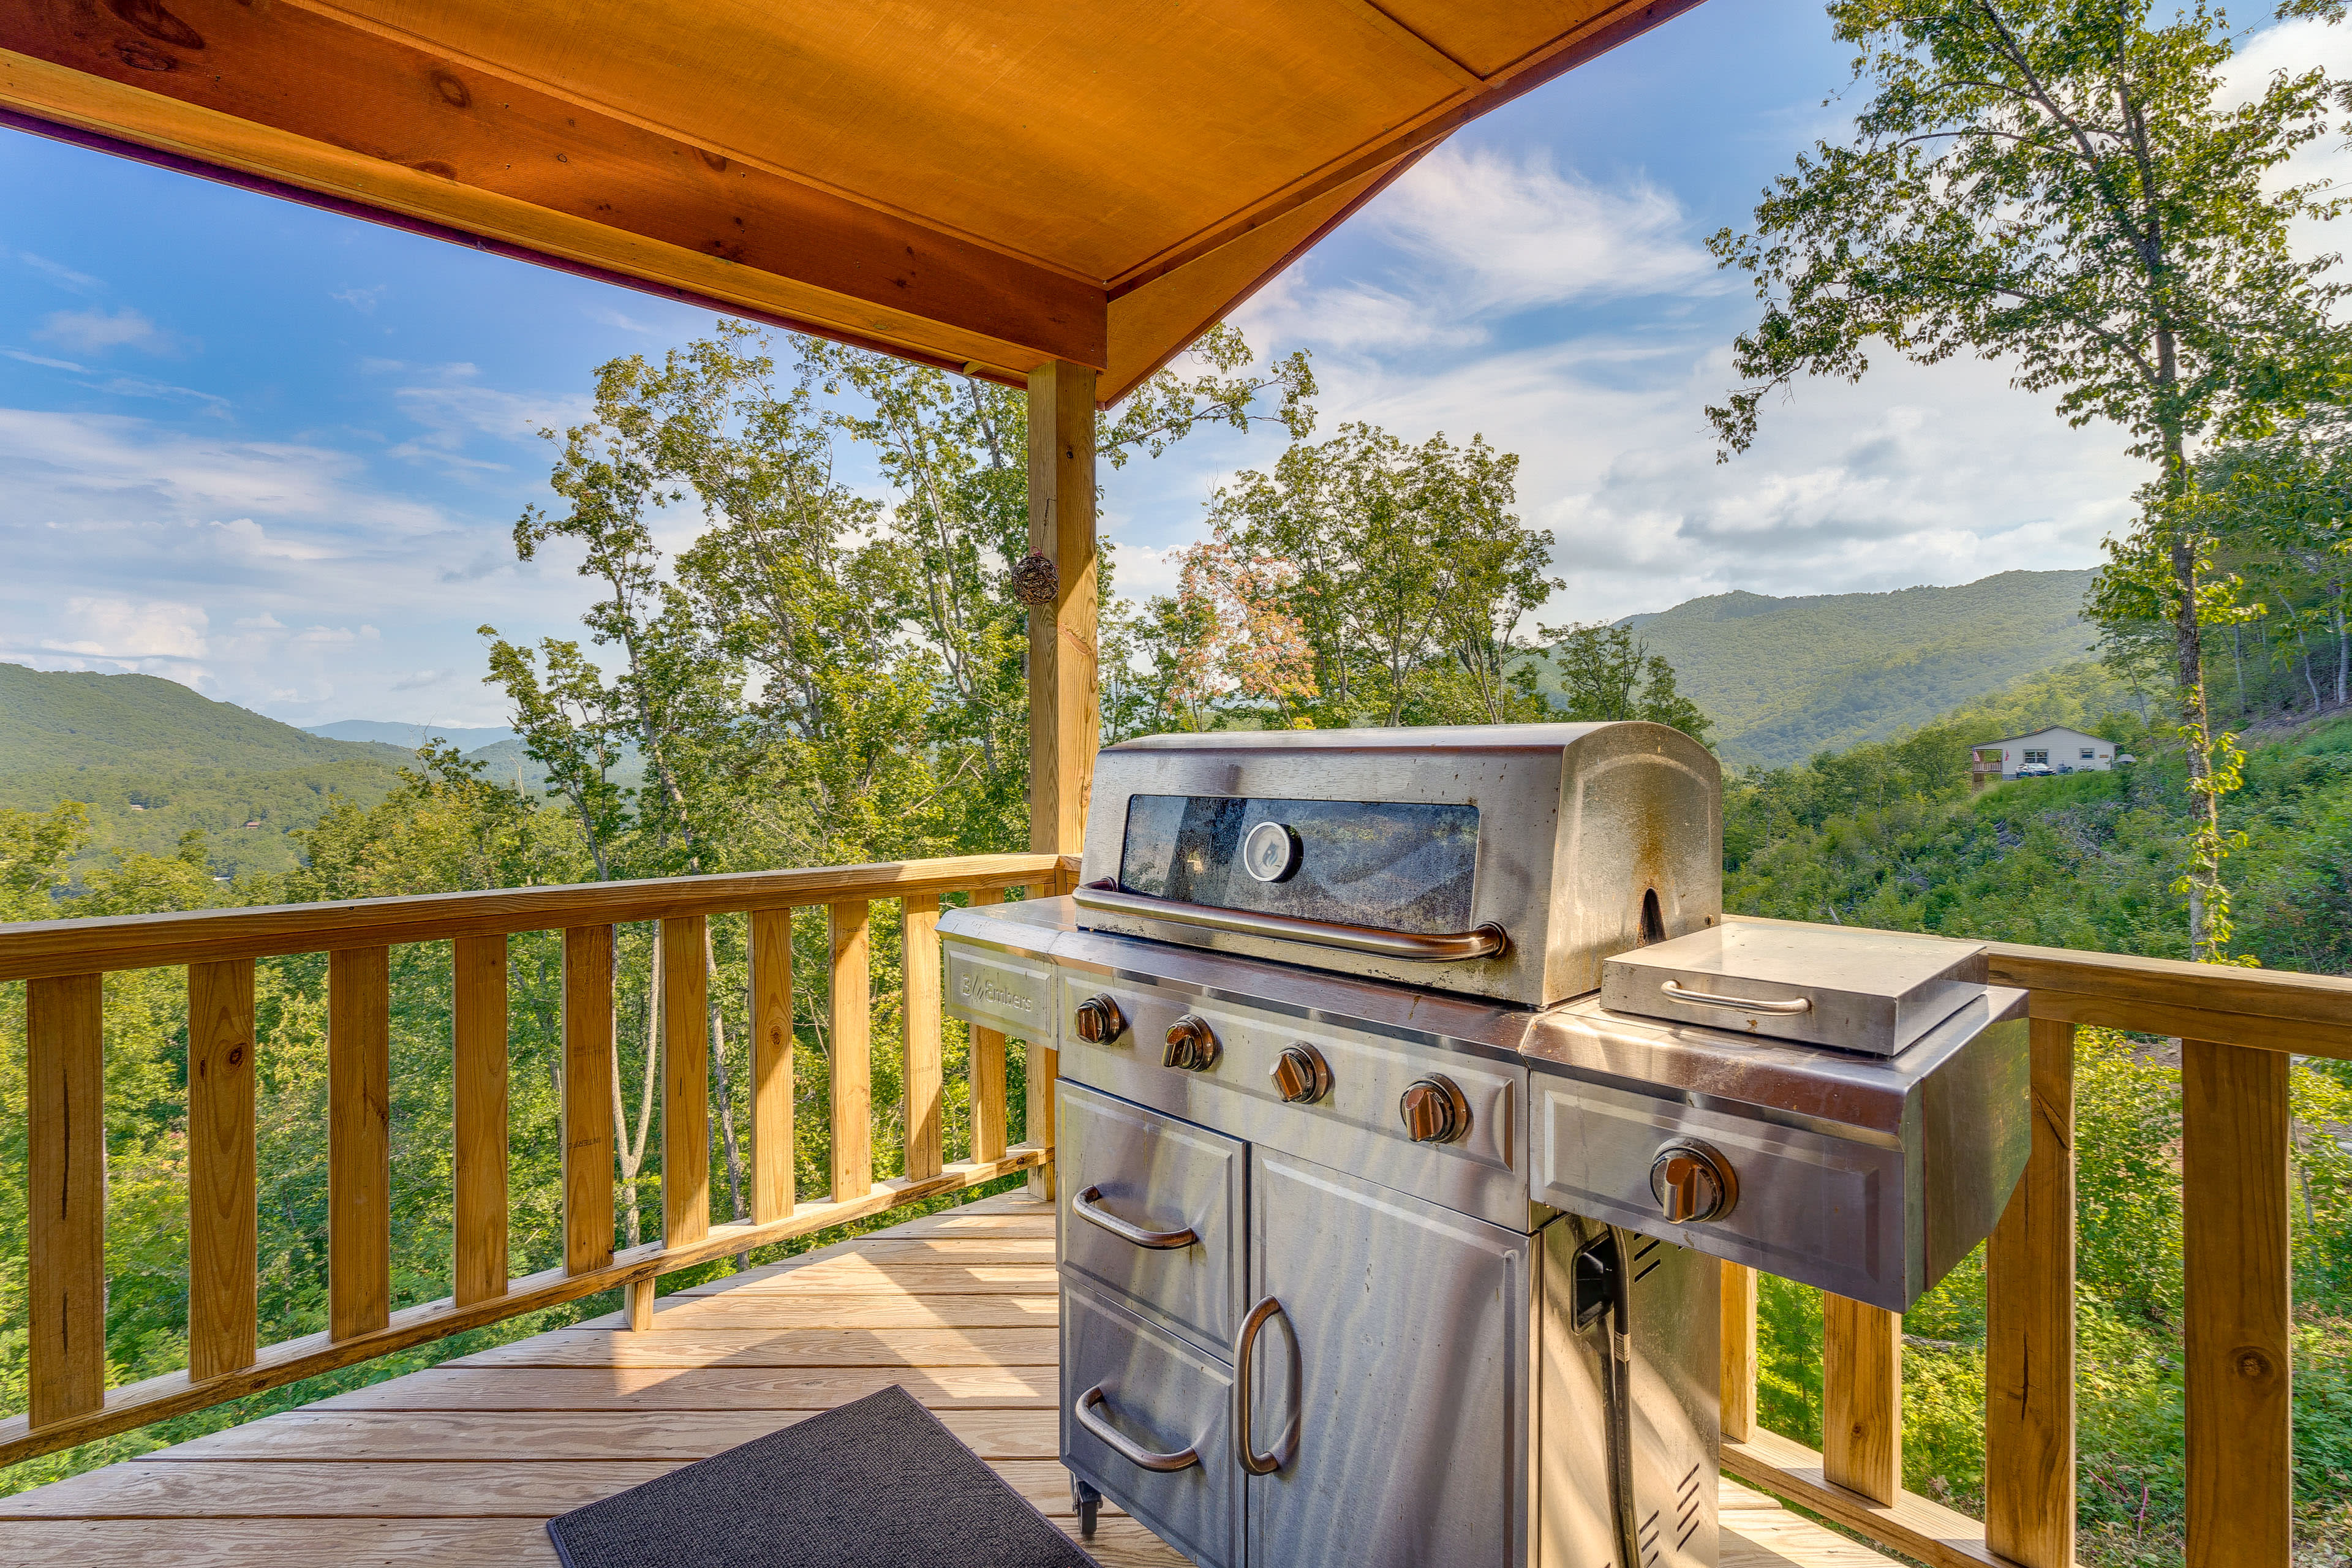 Deck | Gas Grill | Outdoor Seating & Dining | Hammock | Cornhole